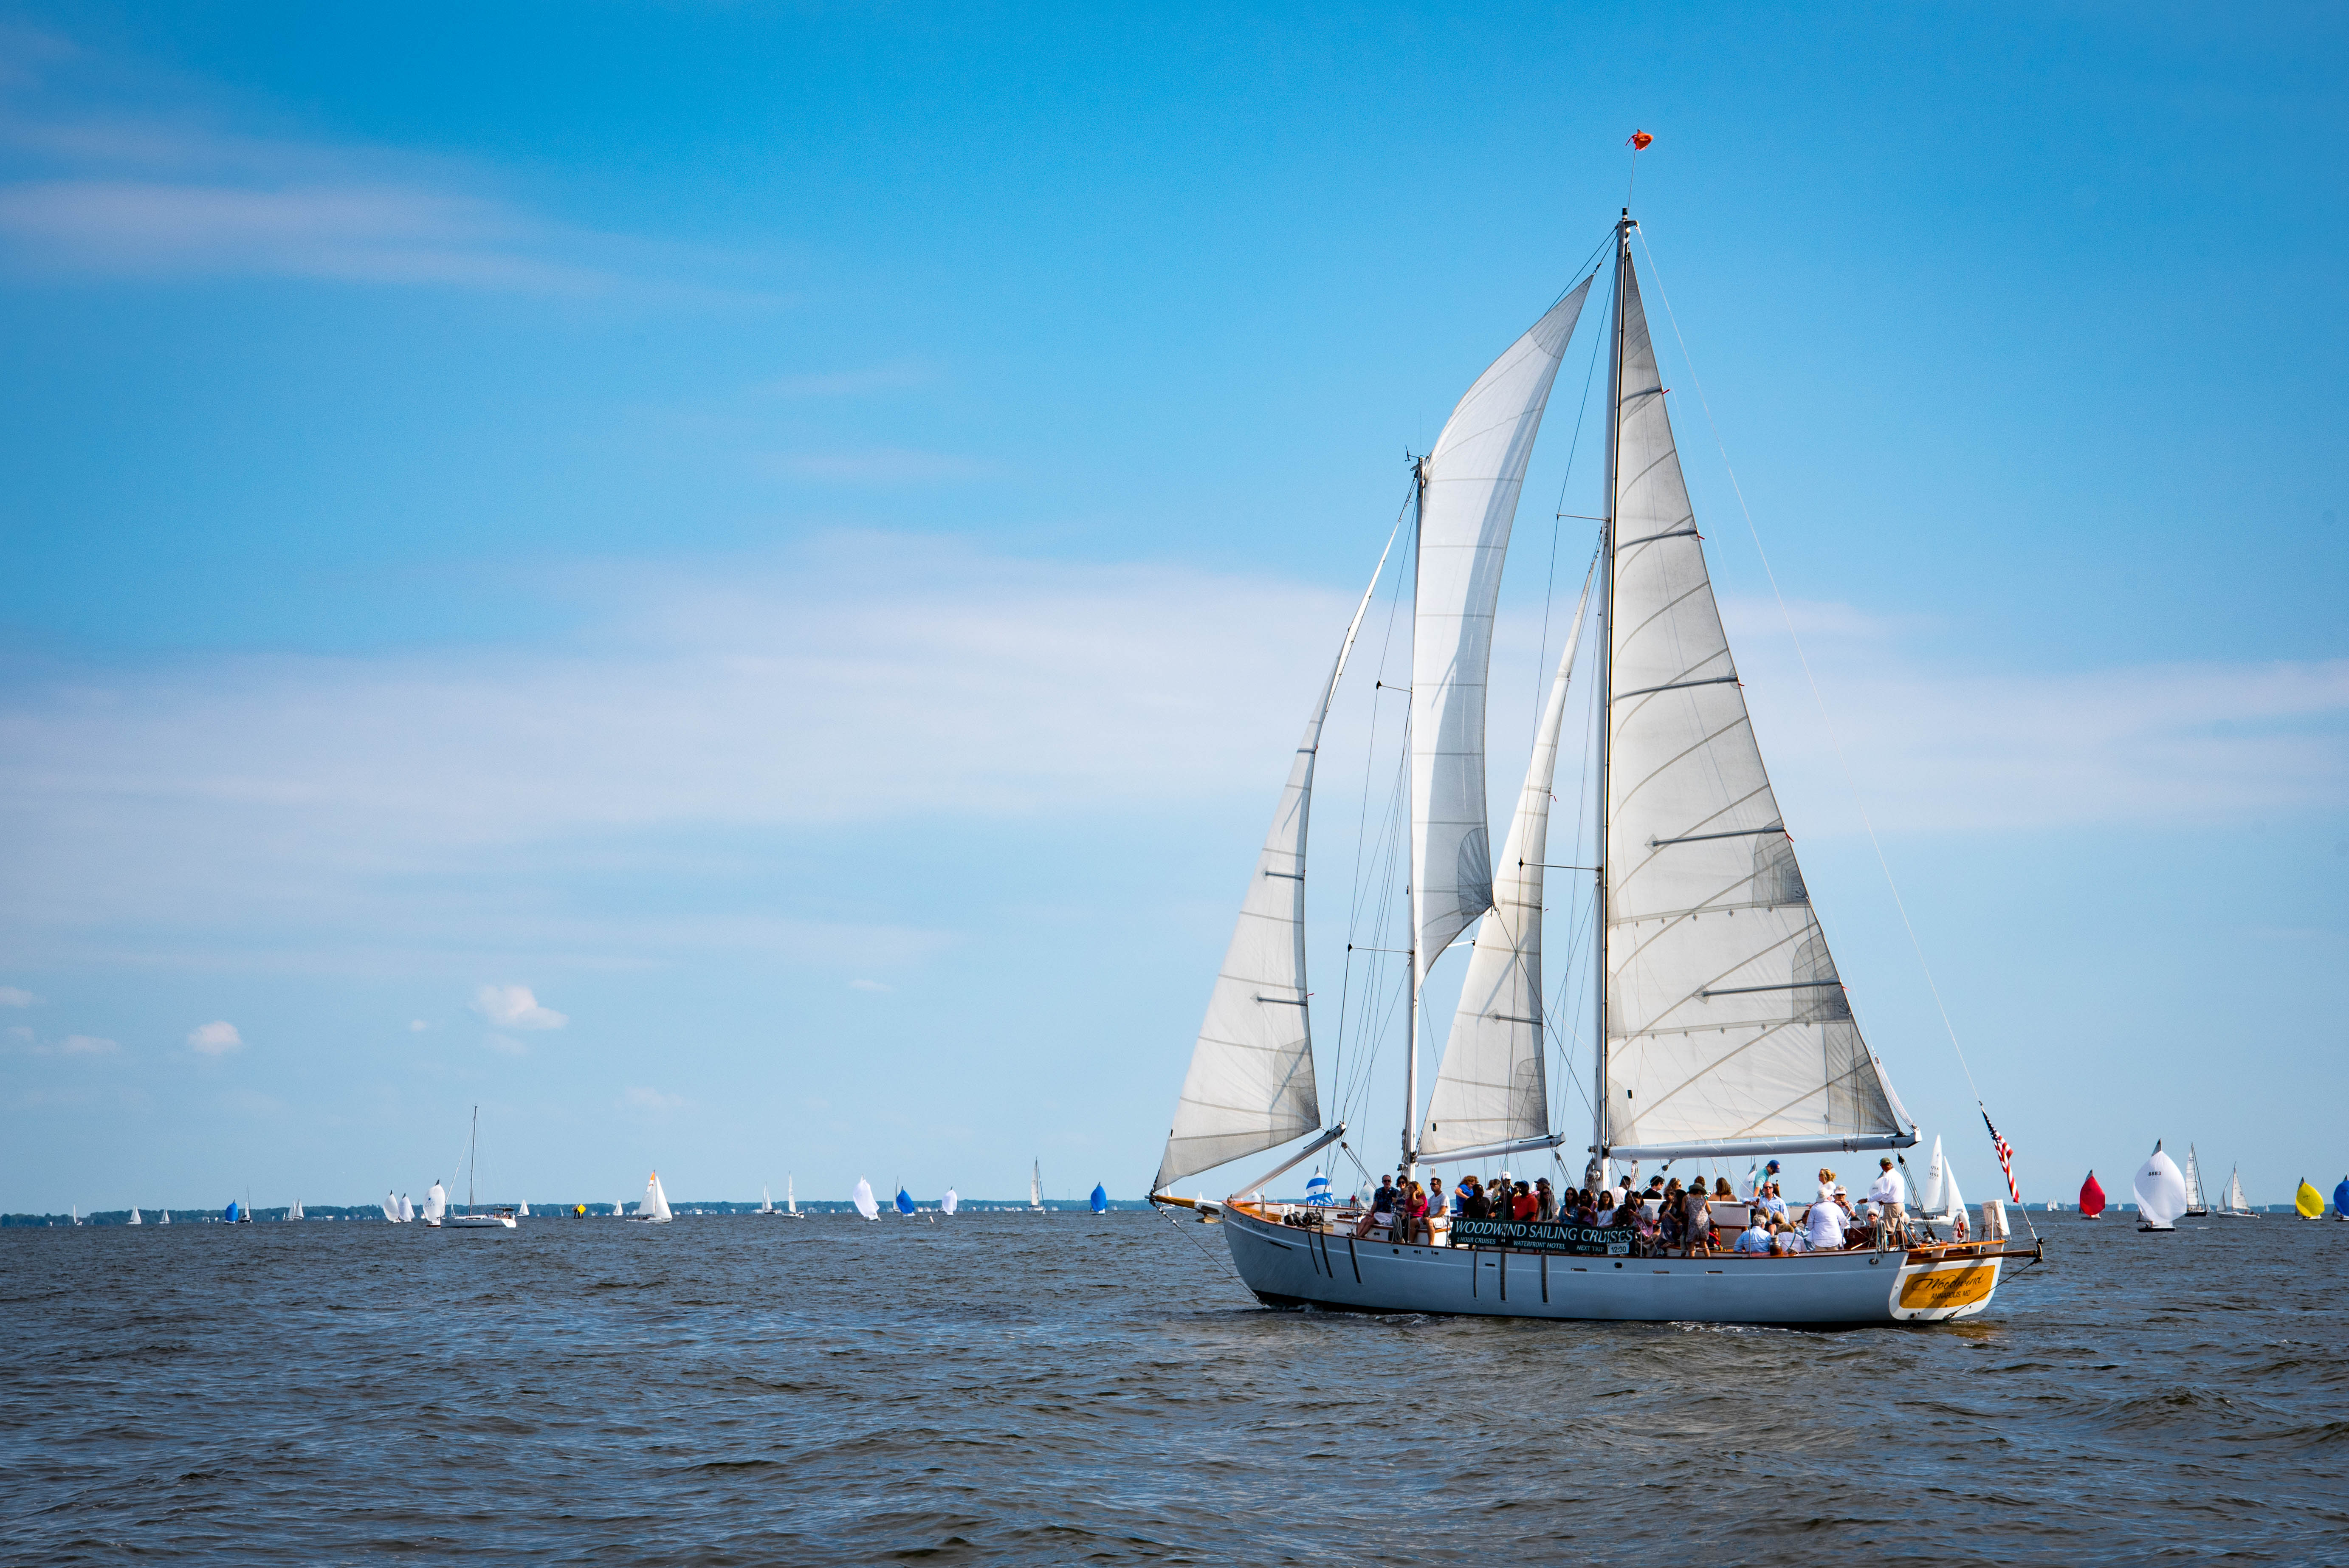 The schooner sailing among dozens of sailboats on the bay